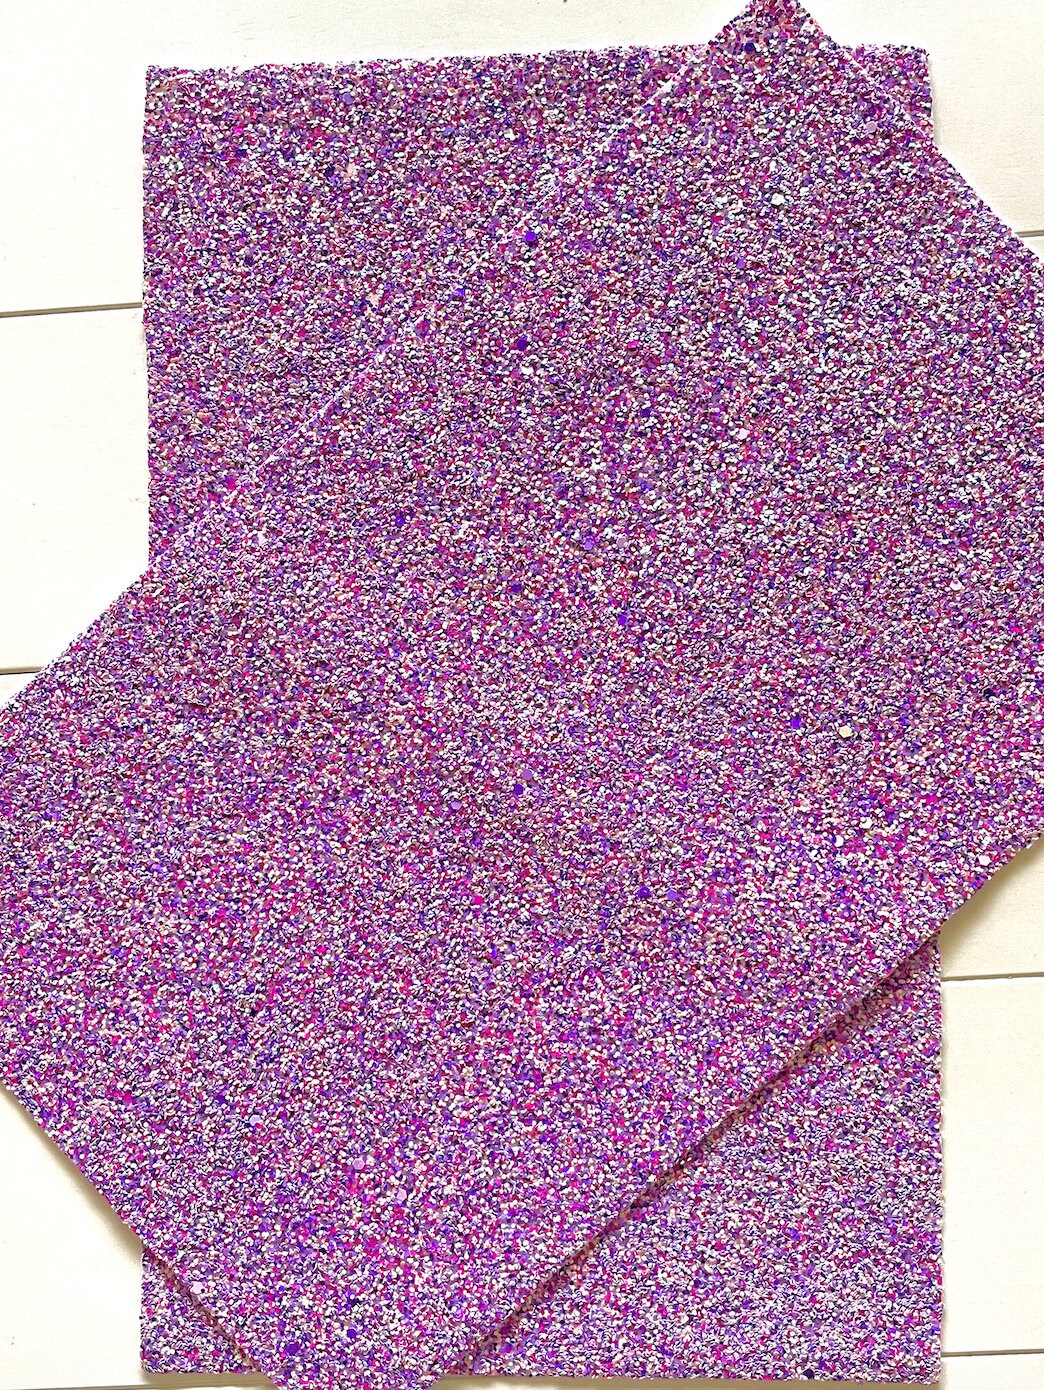 Purple Mixed Chunky Glitter faux leather sheets great for baby bows, ear rings, girl bows, accessories, colorful, shiny TheFabricDude